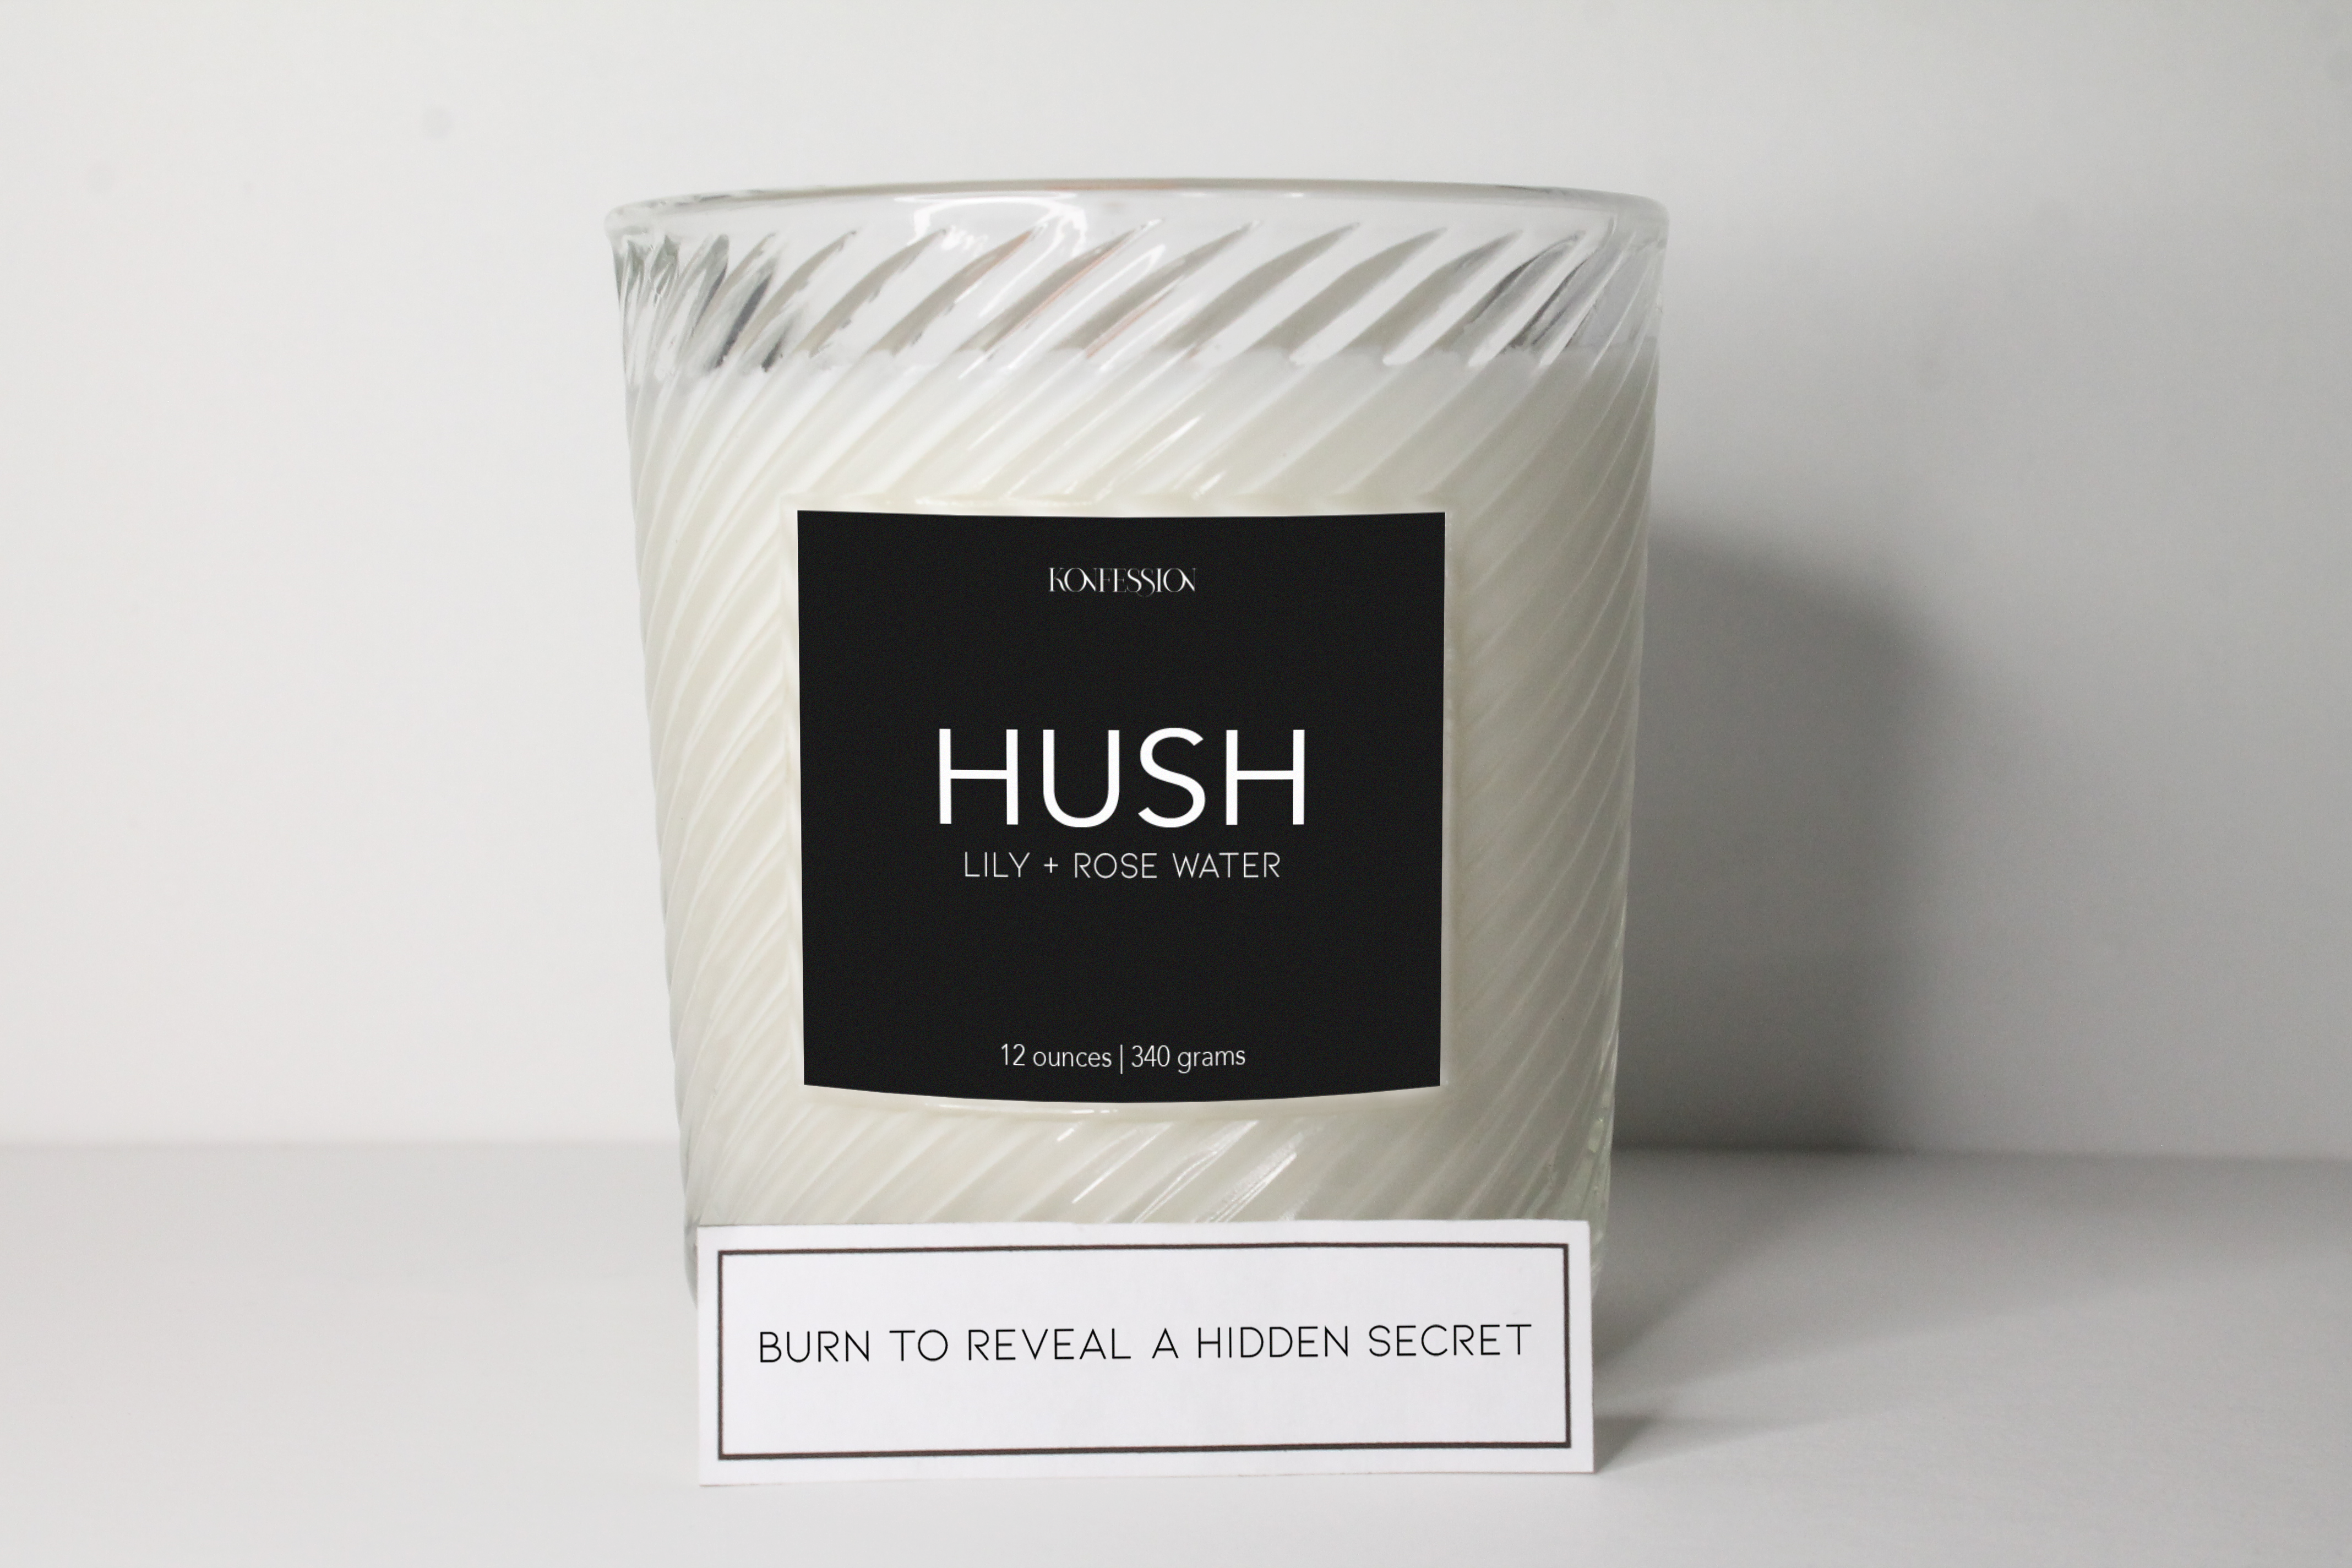 Hidden inside each candle is a secret that has been sent in anonymously from strangers around the world. To help spread love, laughter and awareness. Burn to reveal a hidden secret.